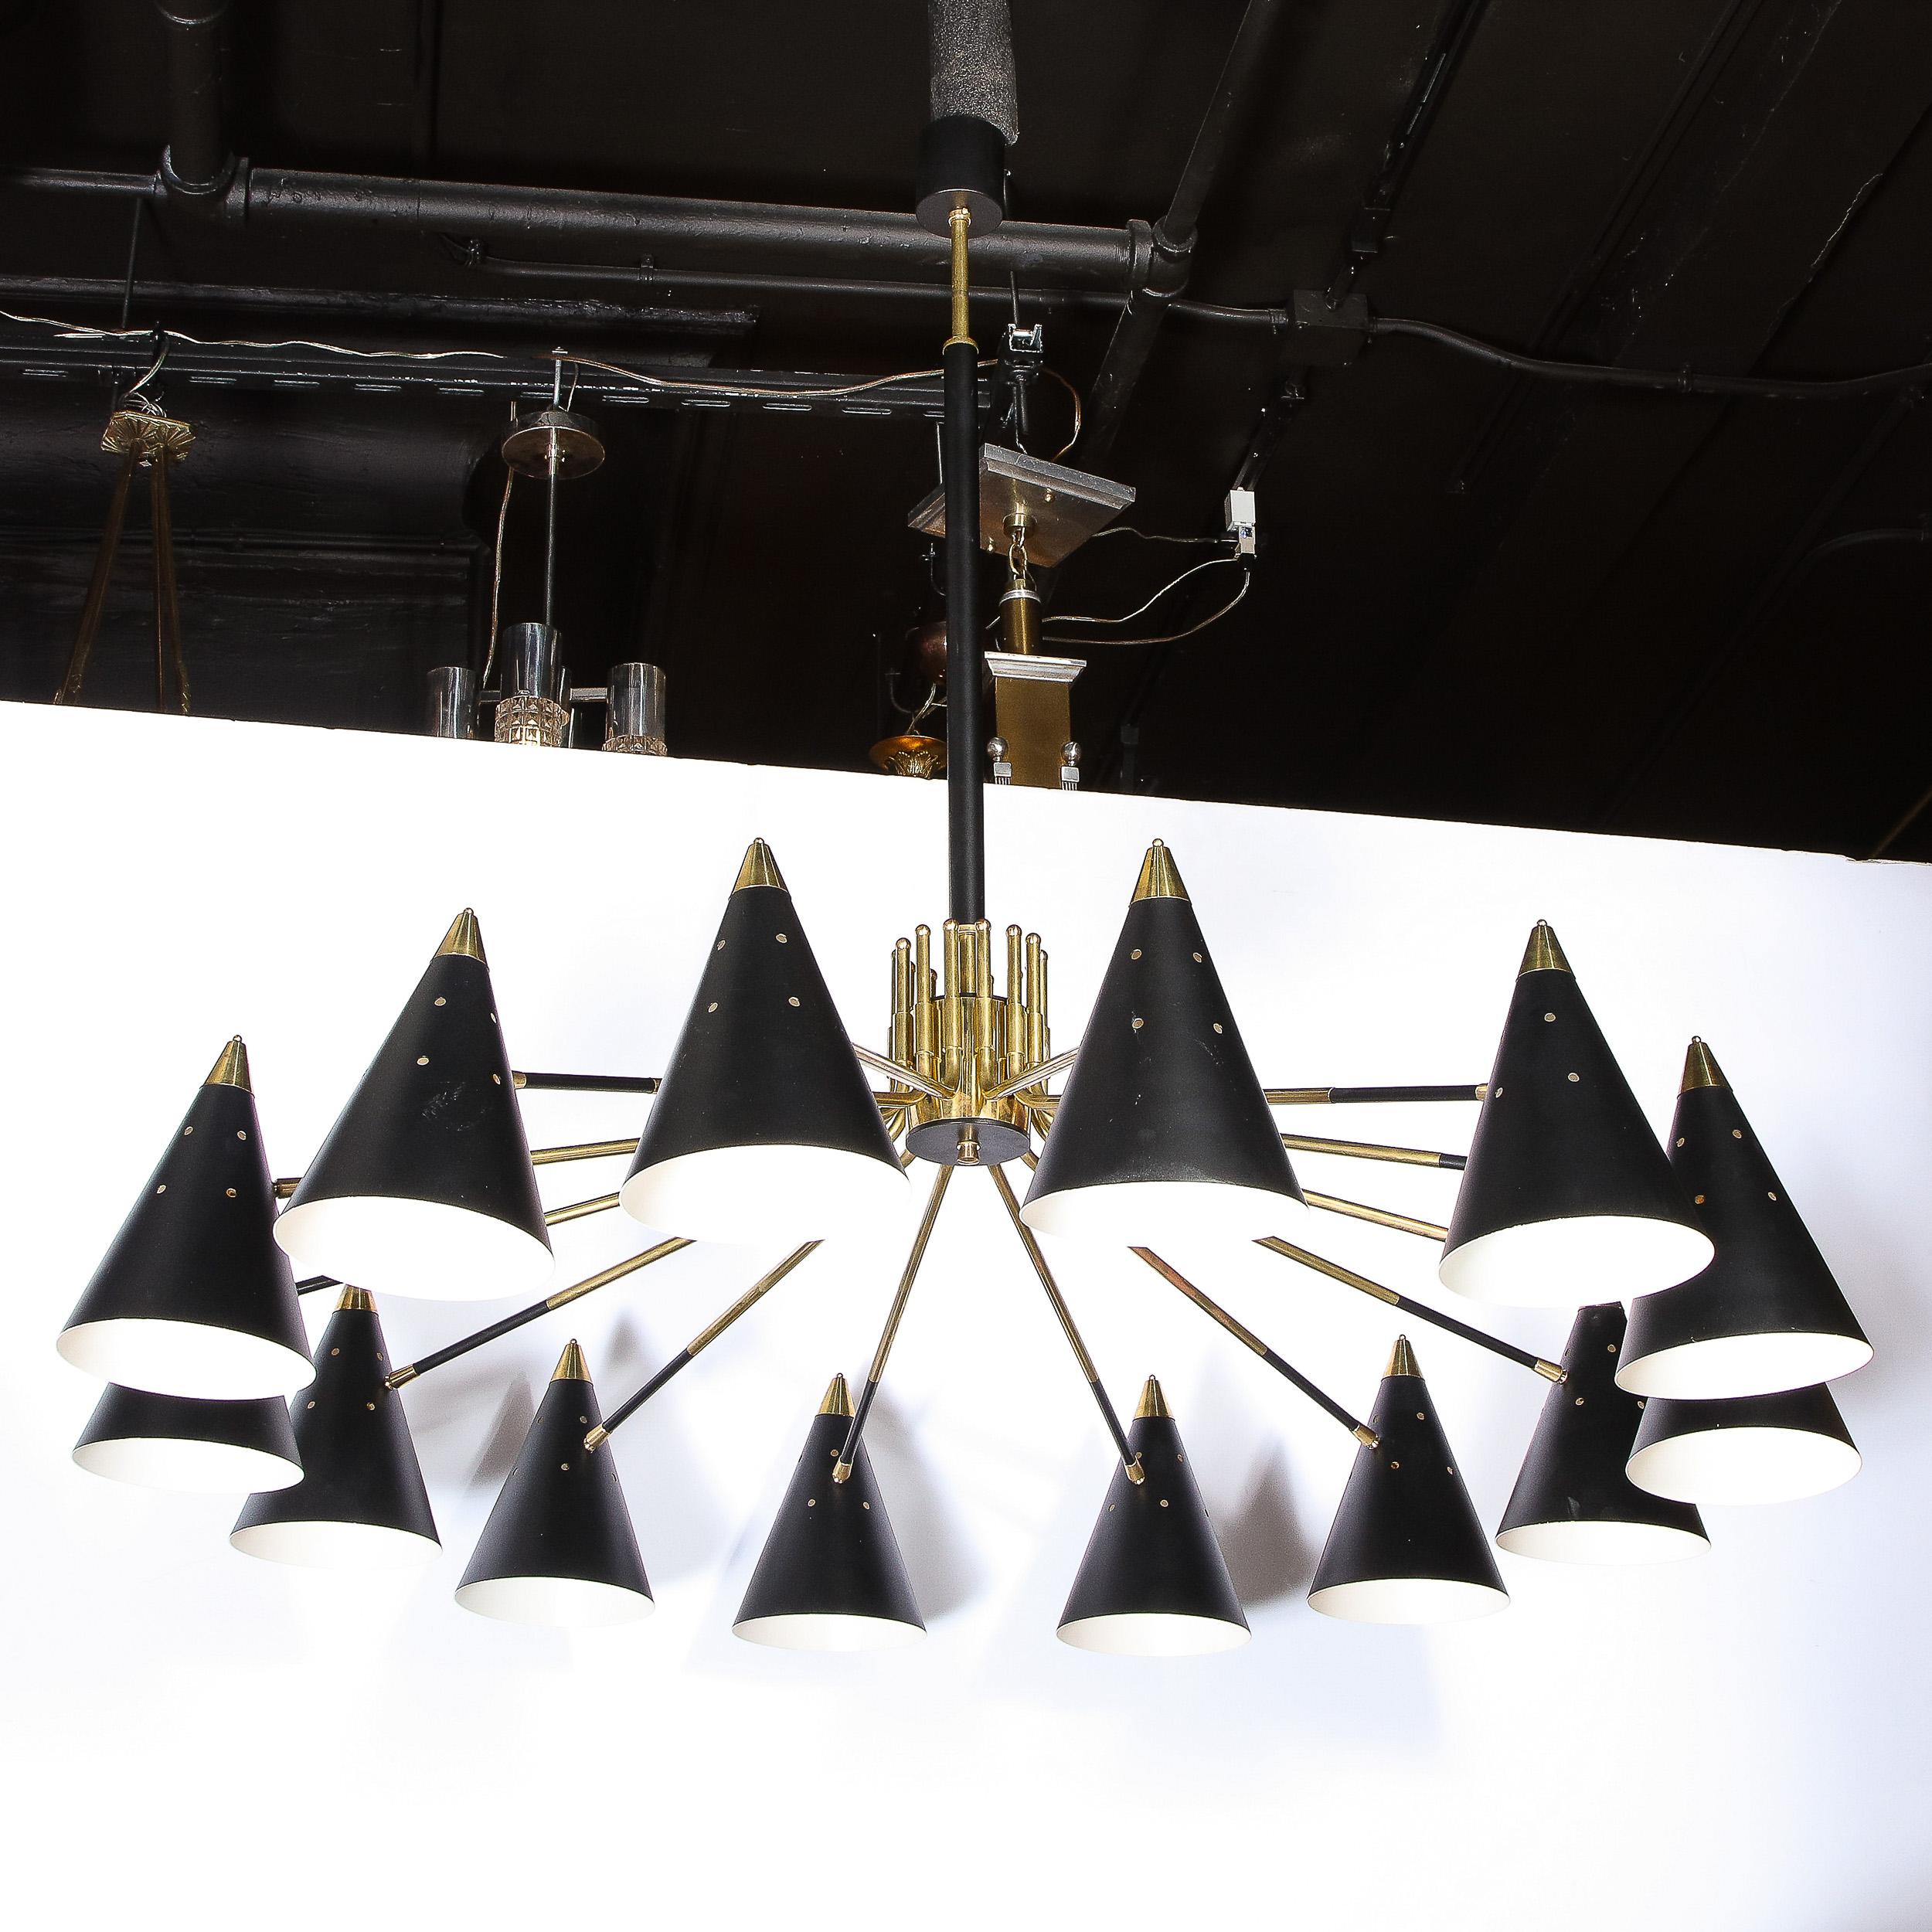 This graphic and monumental Mid-Century Modern chandelier was realized in Italy, circa 1960. A cylindrical brass rod descends from a circular canopy where it segues into a thicker black enamel rod that culminates in the cylindrical body of the